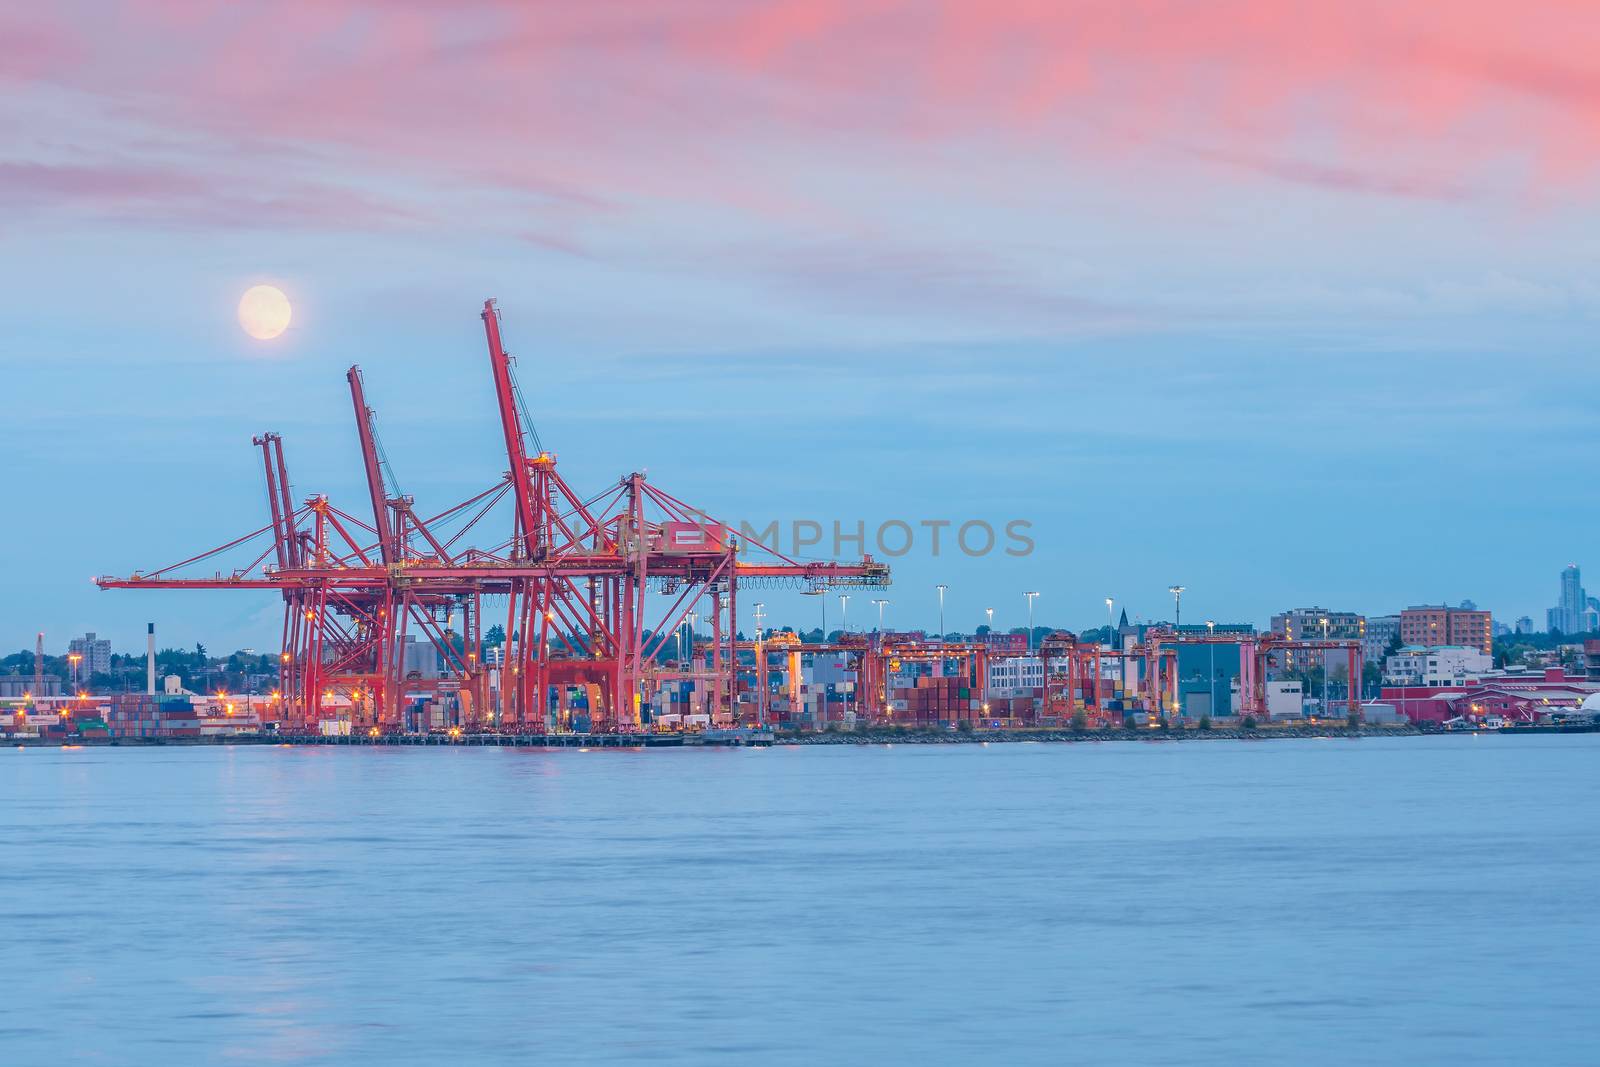 Vancouver Port with hundreds of shipping containers by f11photo